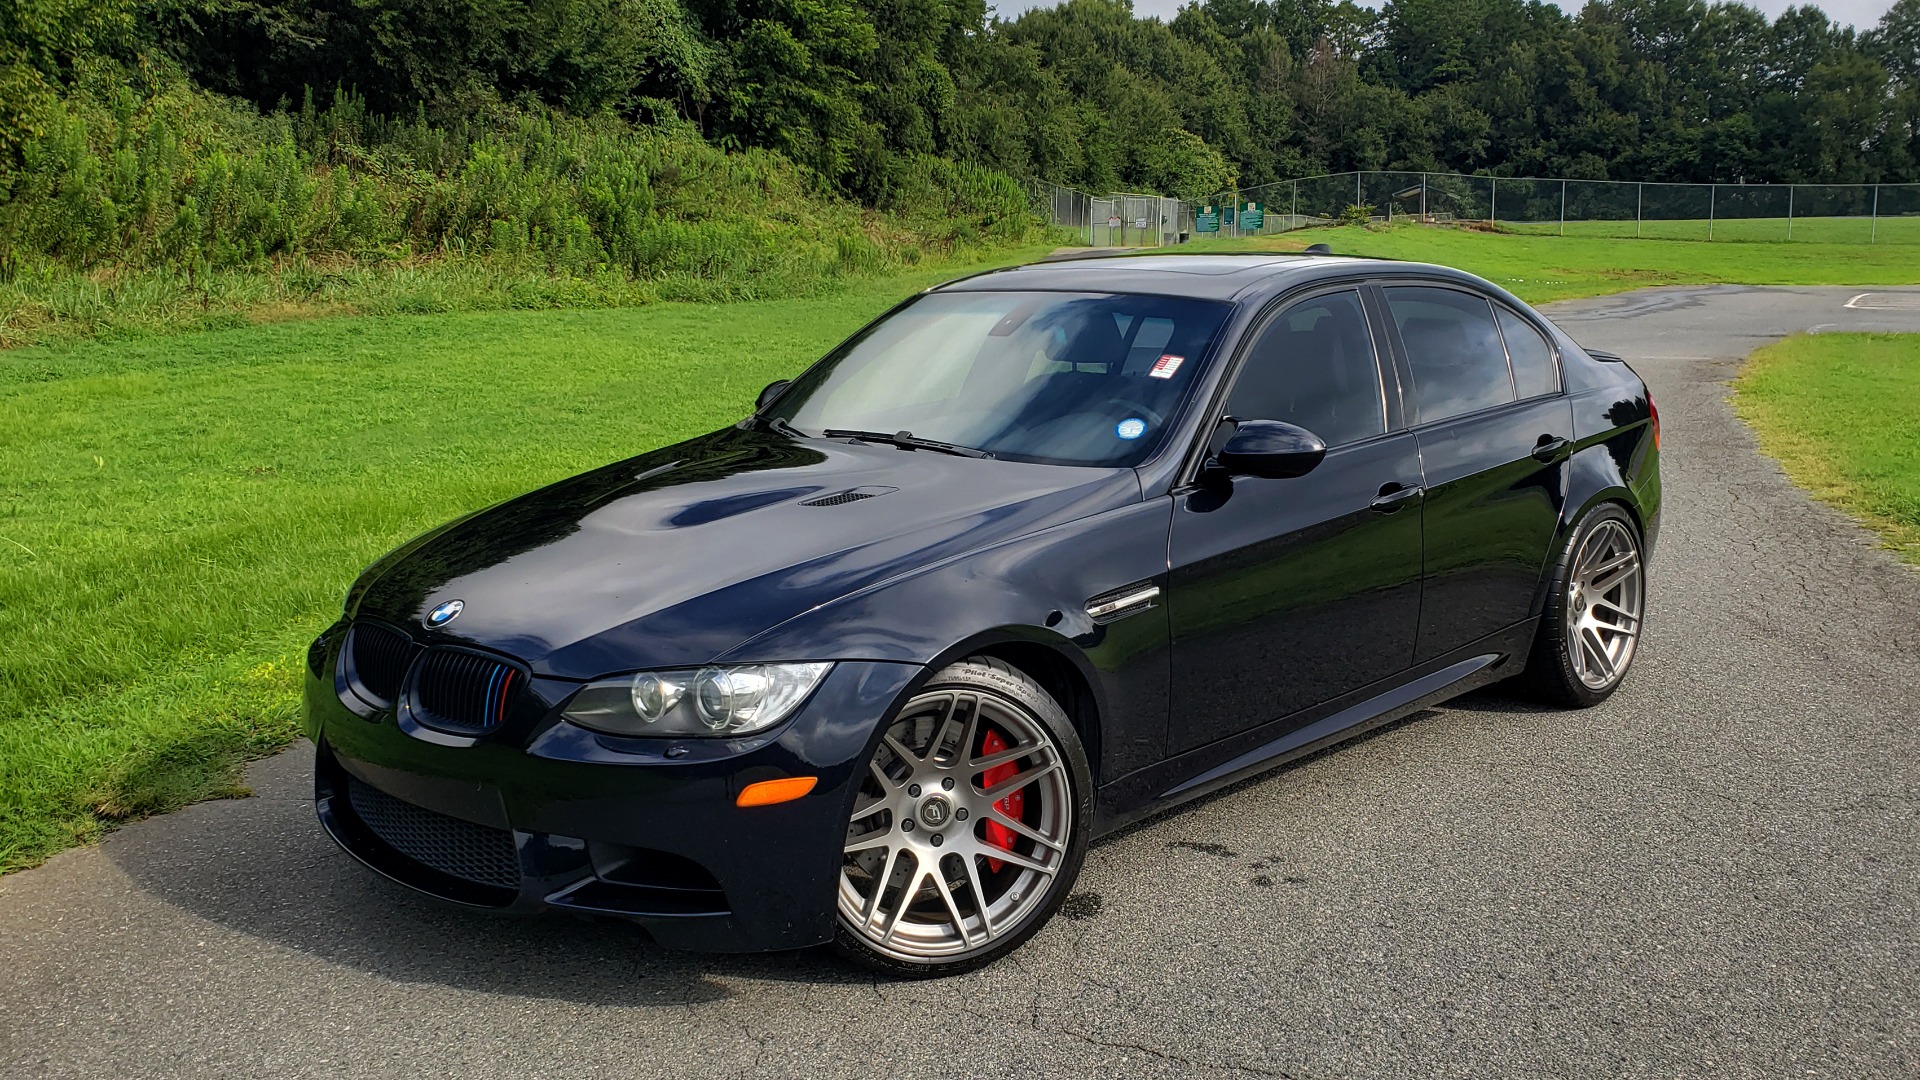 Used 2008 BMW 3 SERIES M3 PREMIUM / TECH / PDC / SUNROOF / 4.0L V8 / 6-SPD MANUAL for sale Sold at Formula Imports in Charlotte NC 28227 1